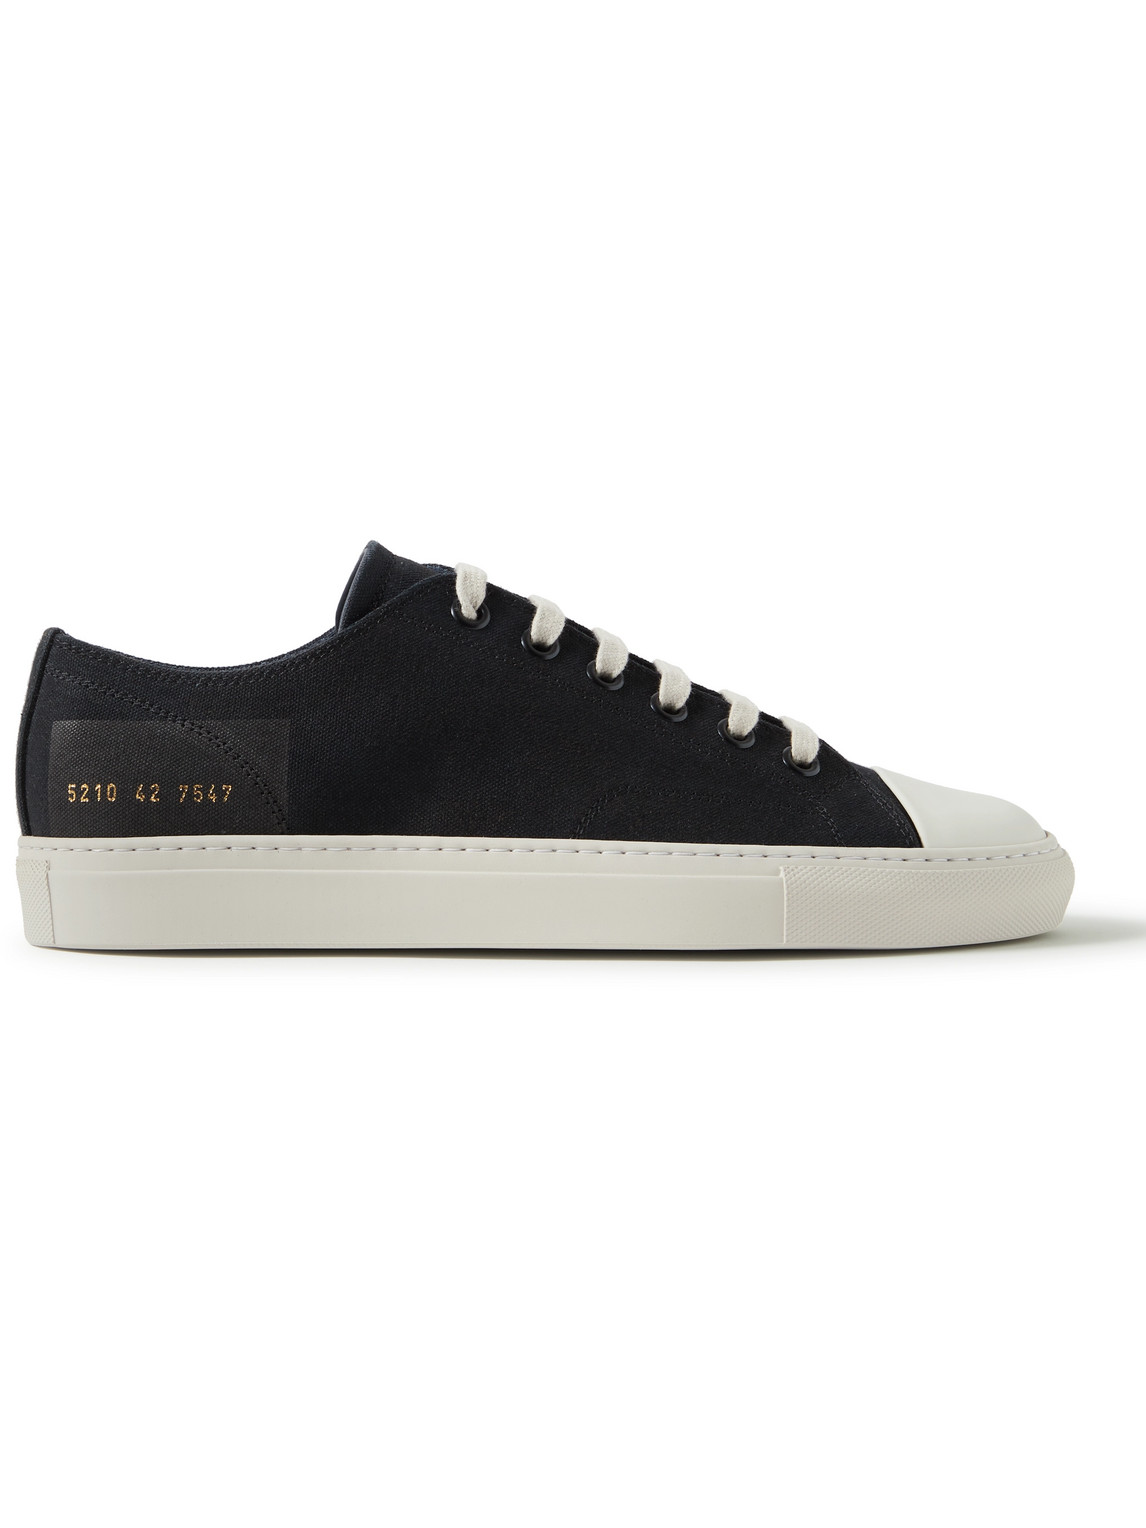 Tournament Low Rubber-Trimmed Canvas Sneakers